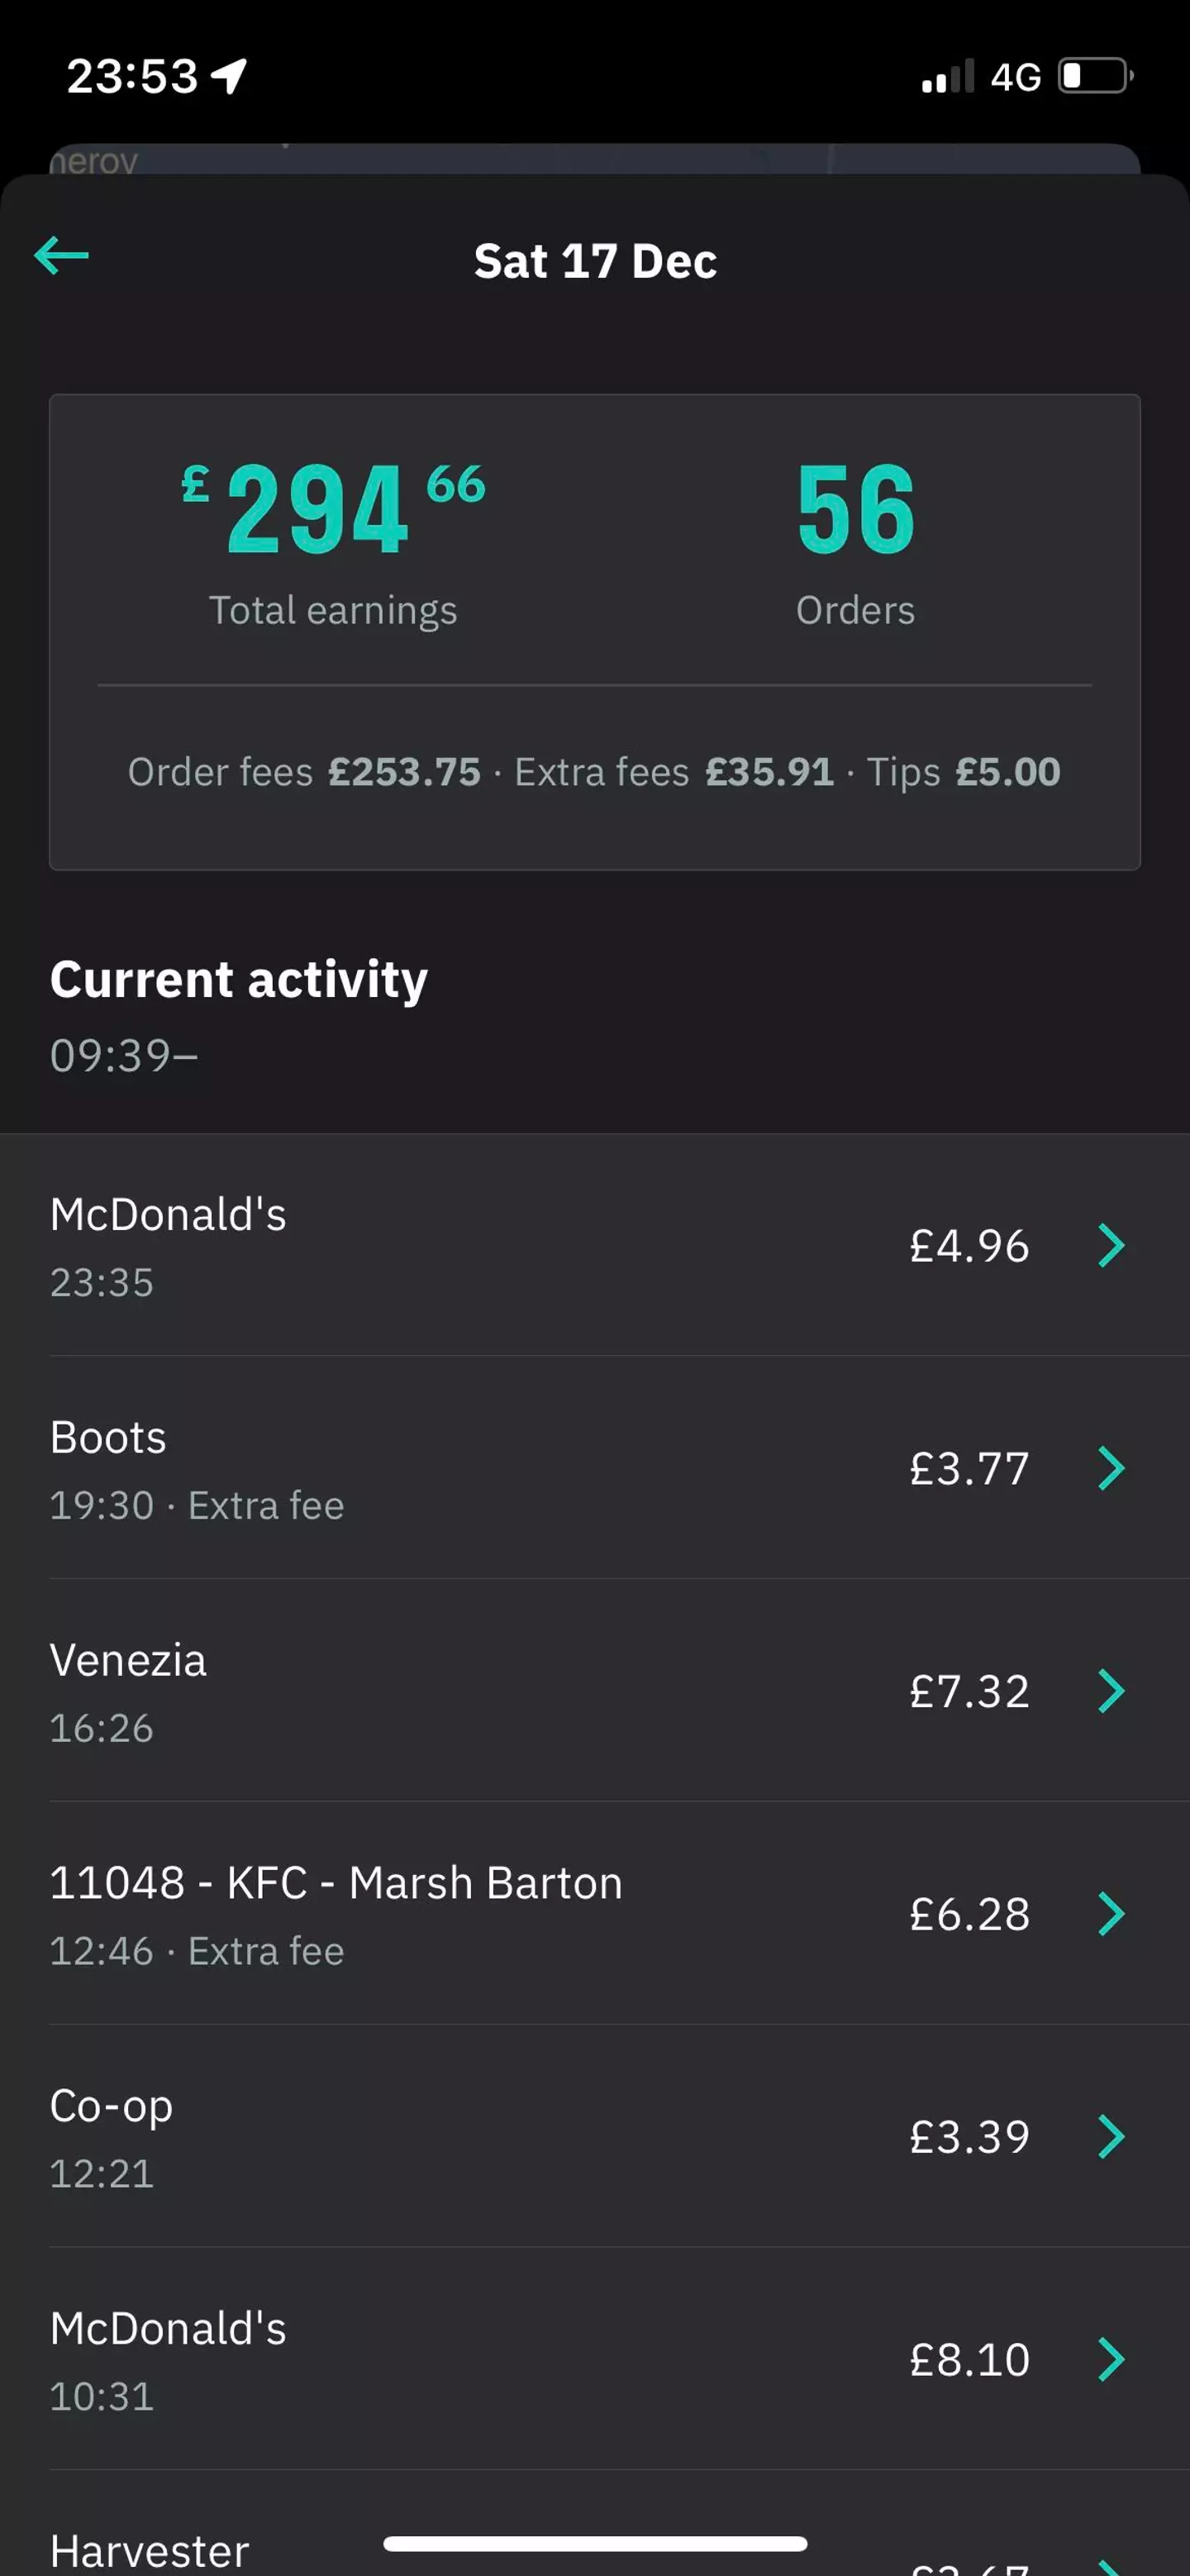 The Deliveroo driver earned a total of £294.66 in one day.